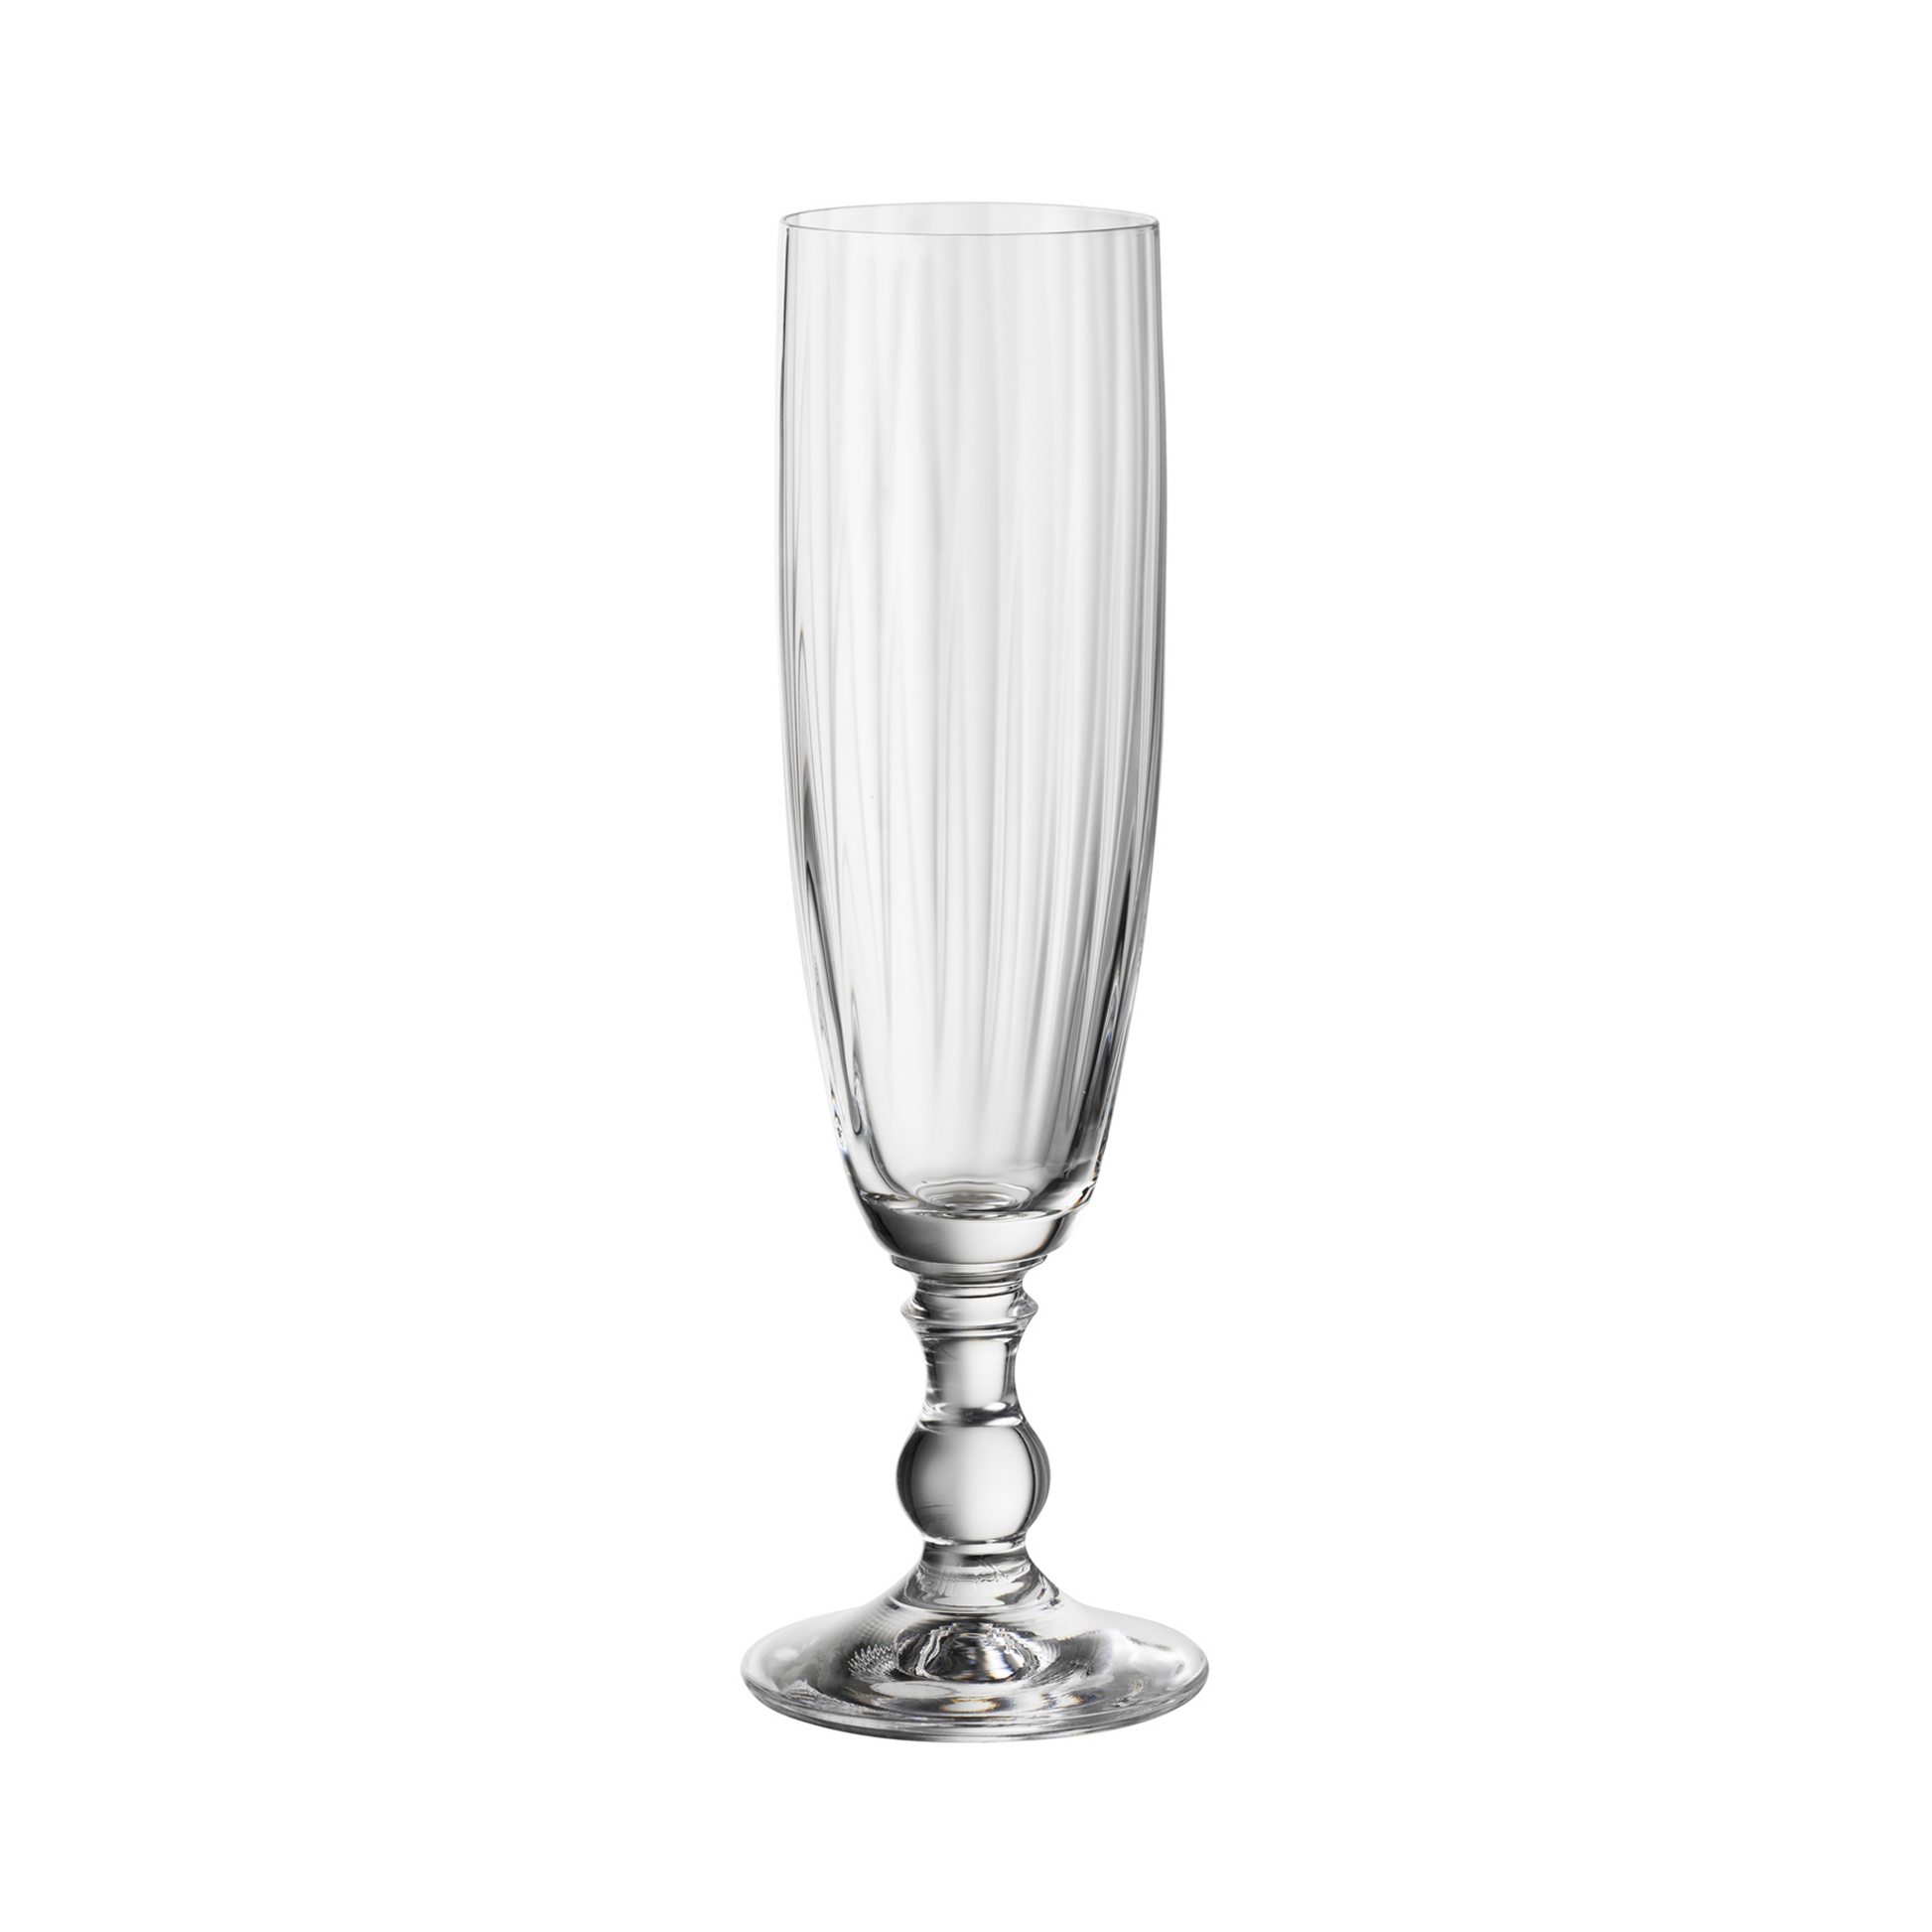 Champagne glass with ribbed effect and fancy stem